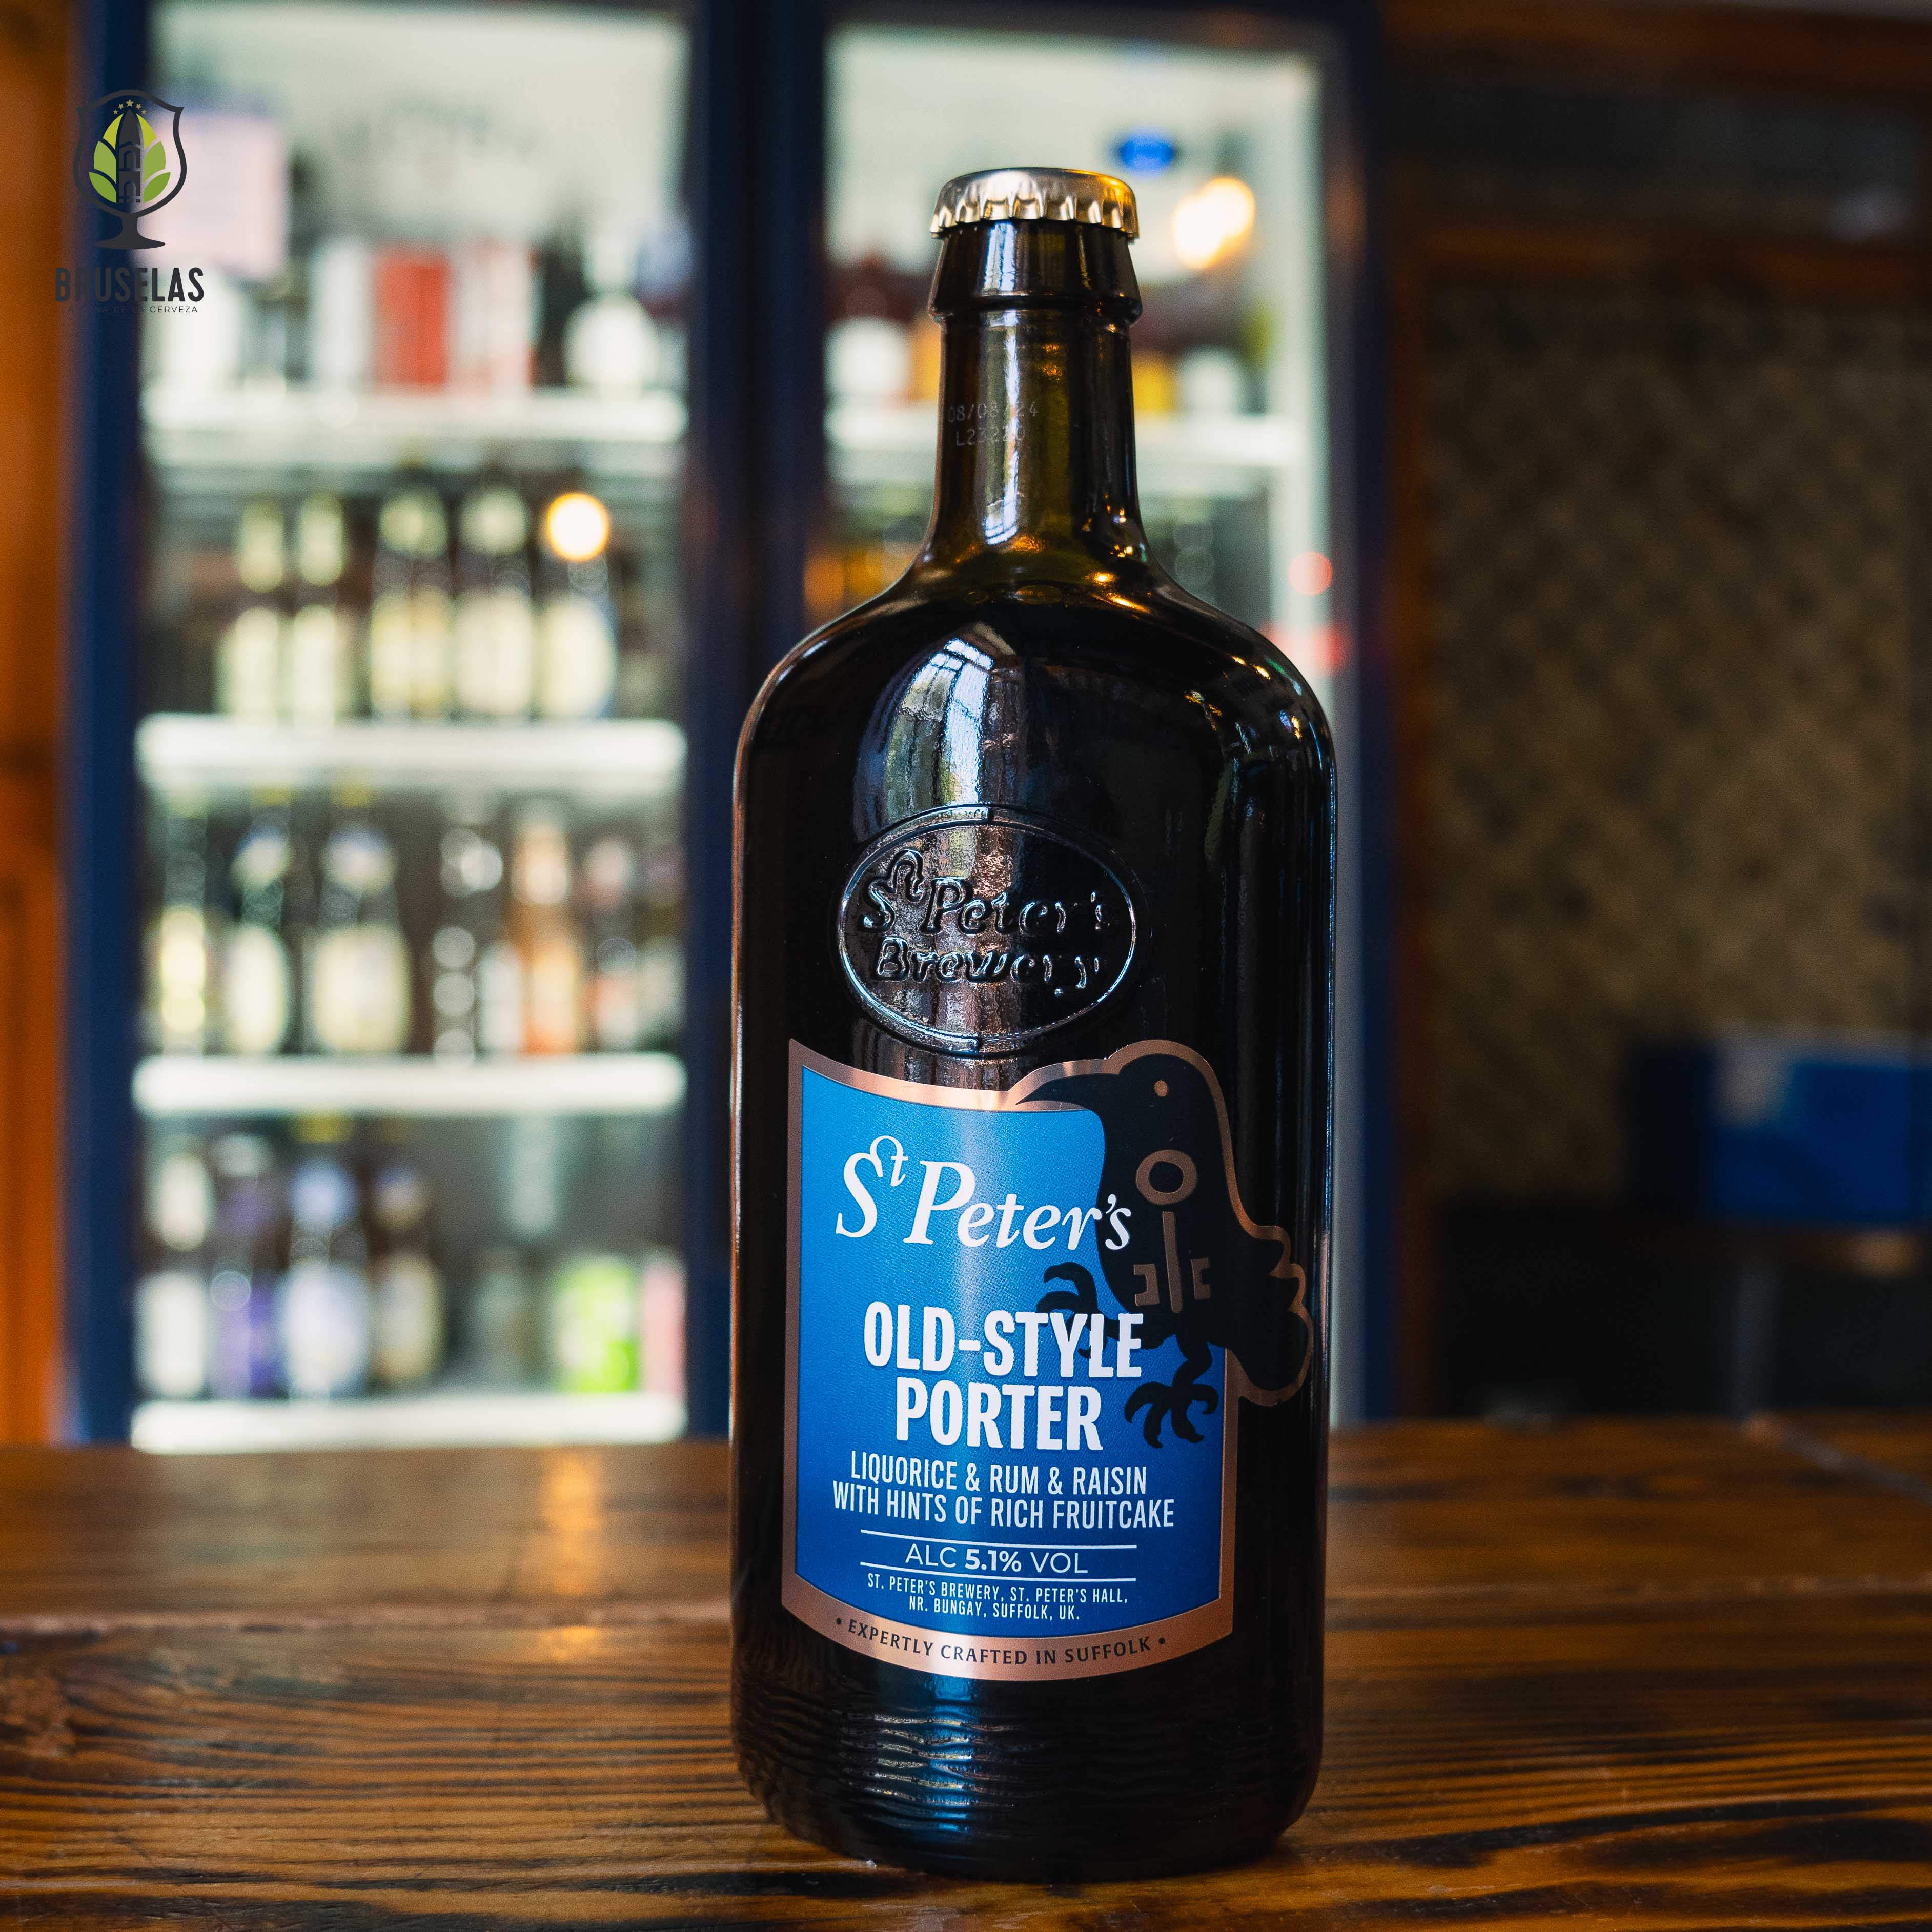 ST. PETERS OLD STYLE PORTER